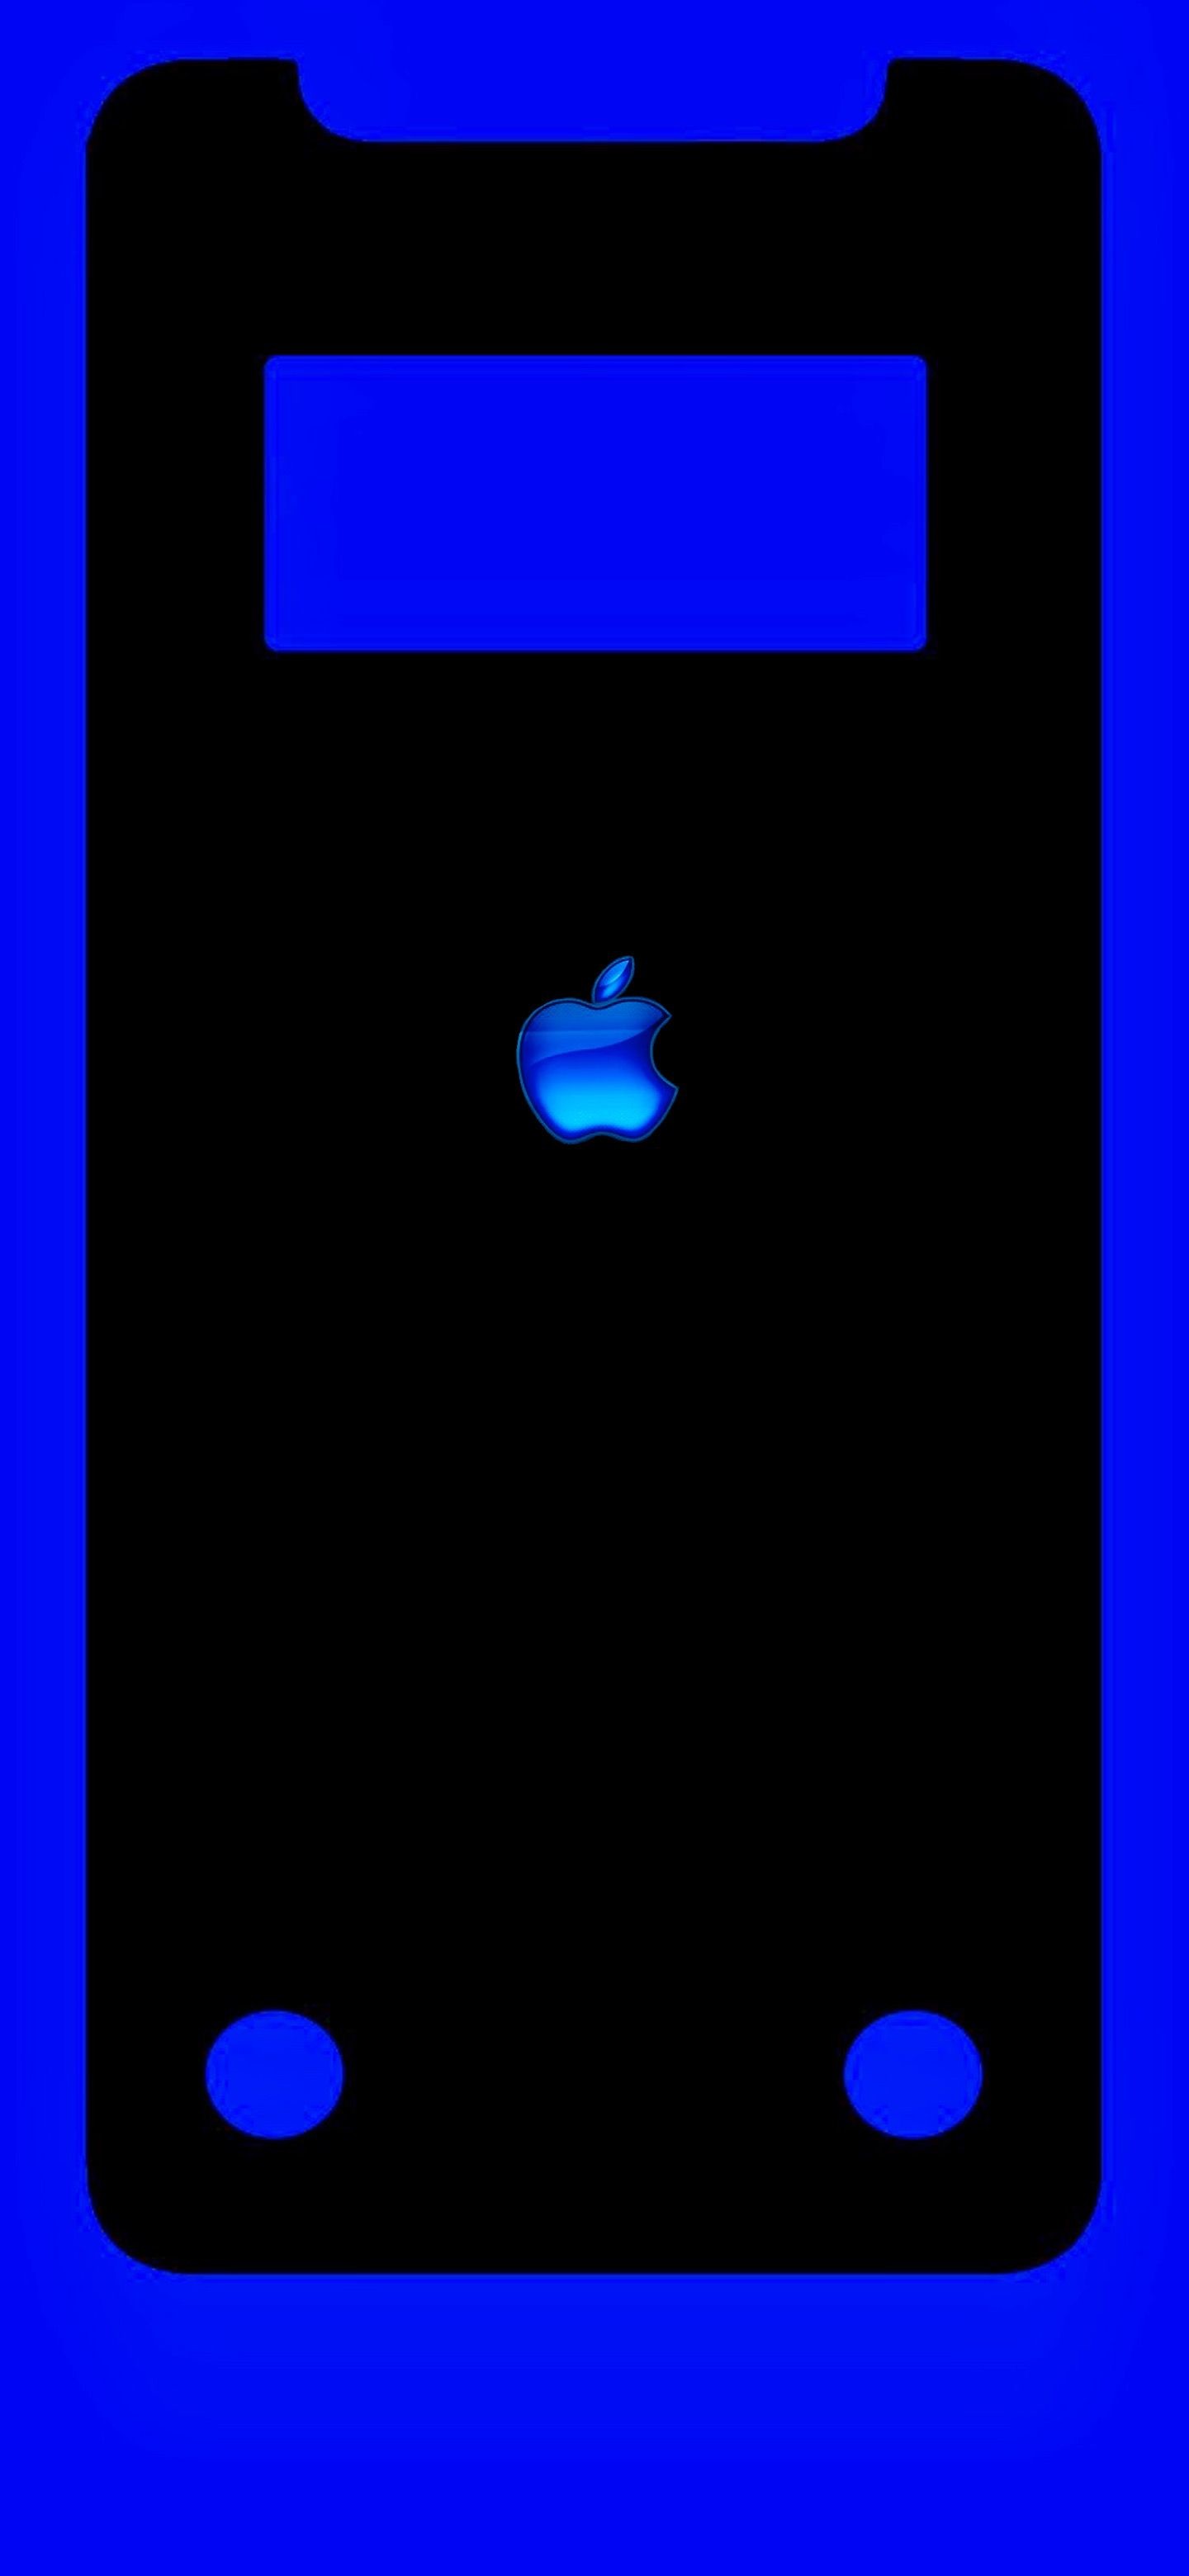 1440x3120, Blue Apple Mobile Wallpaper, Phone Wallpapers - Best Blue Wallpaper For Mobile - HD Wallpaper 